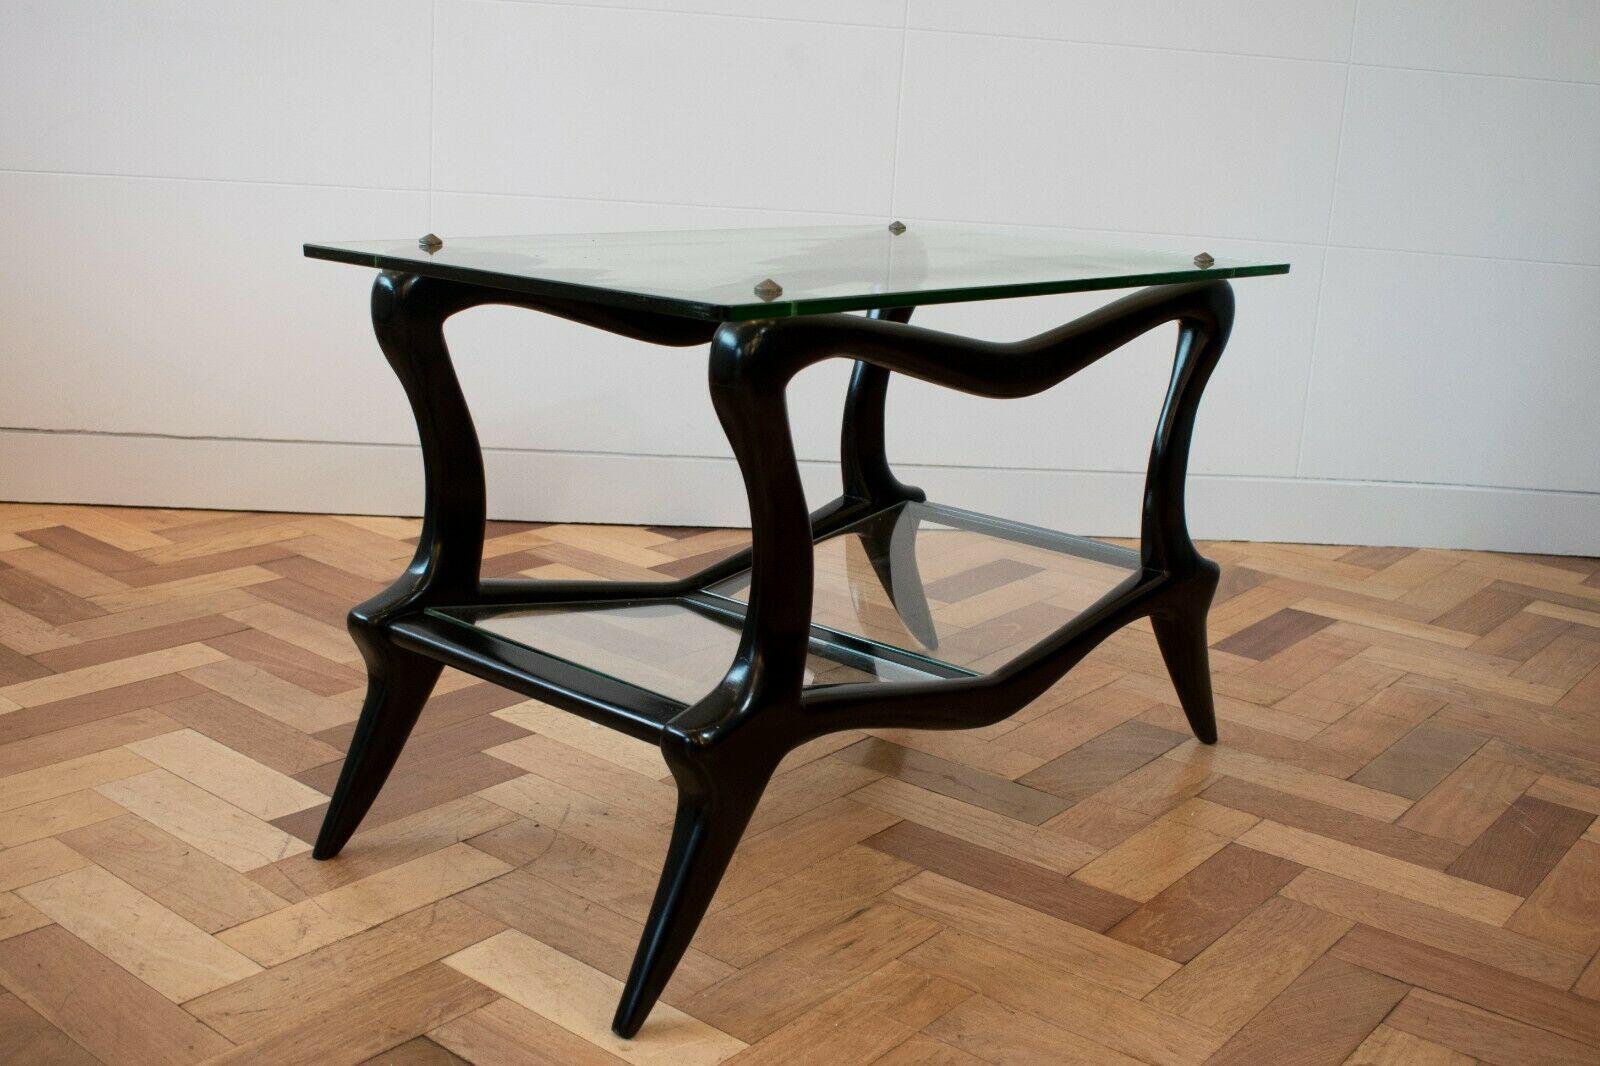 An amazing and rare Italian 1950s glass coffee table with sculptural ebonised wood legs. 

This beautiful coffee table features a curved ebonised wood form that holds a glass top. 

A sculptural piece that encapsulates the beauty of Mid-Century